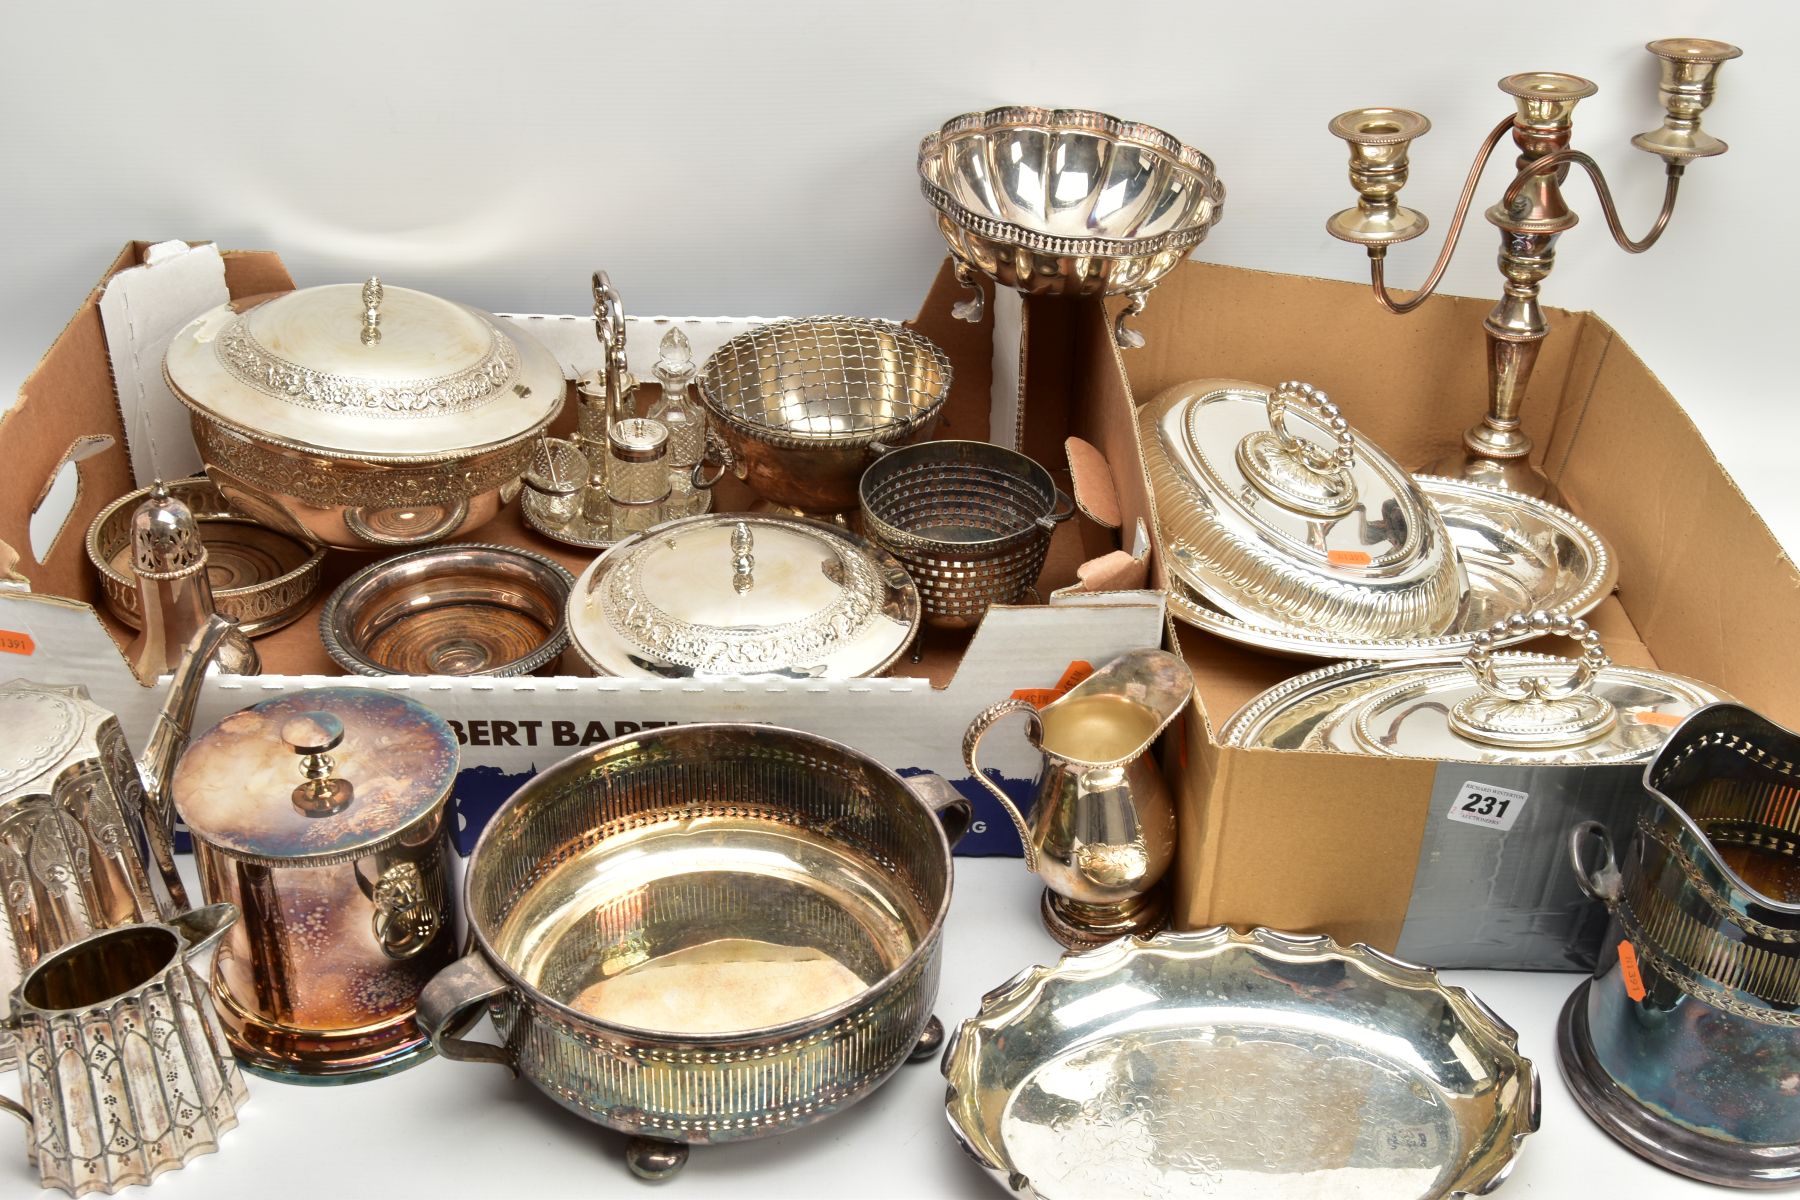 TWO BOXES OF WHITE METAL WARE, to include two circular entree dishes with covers, two oval entree